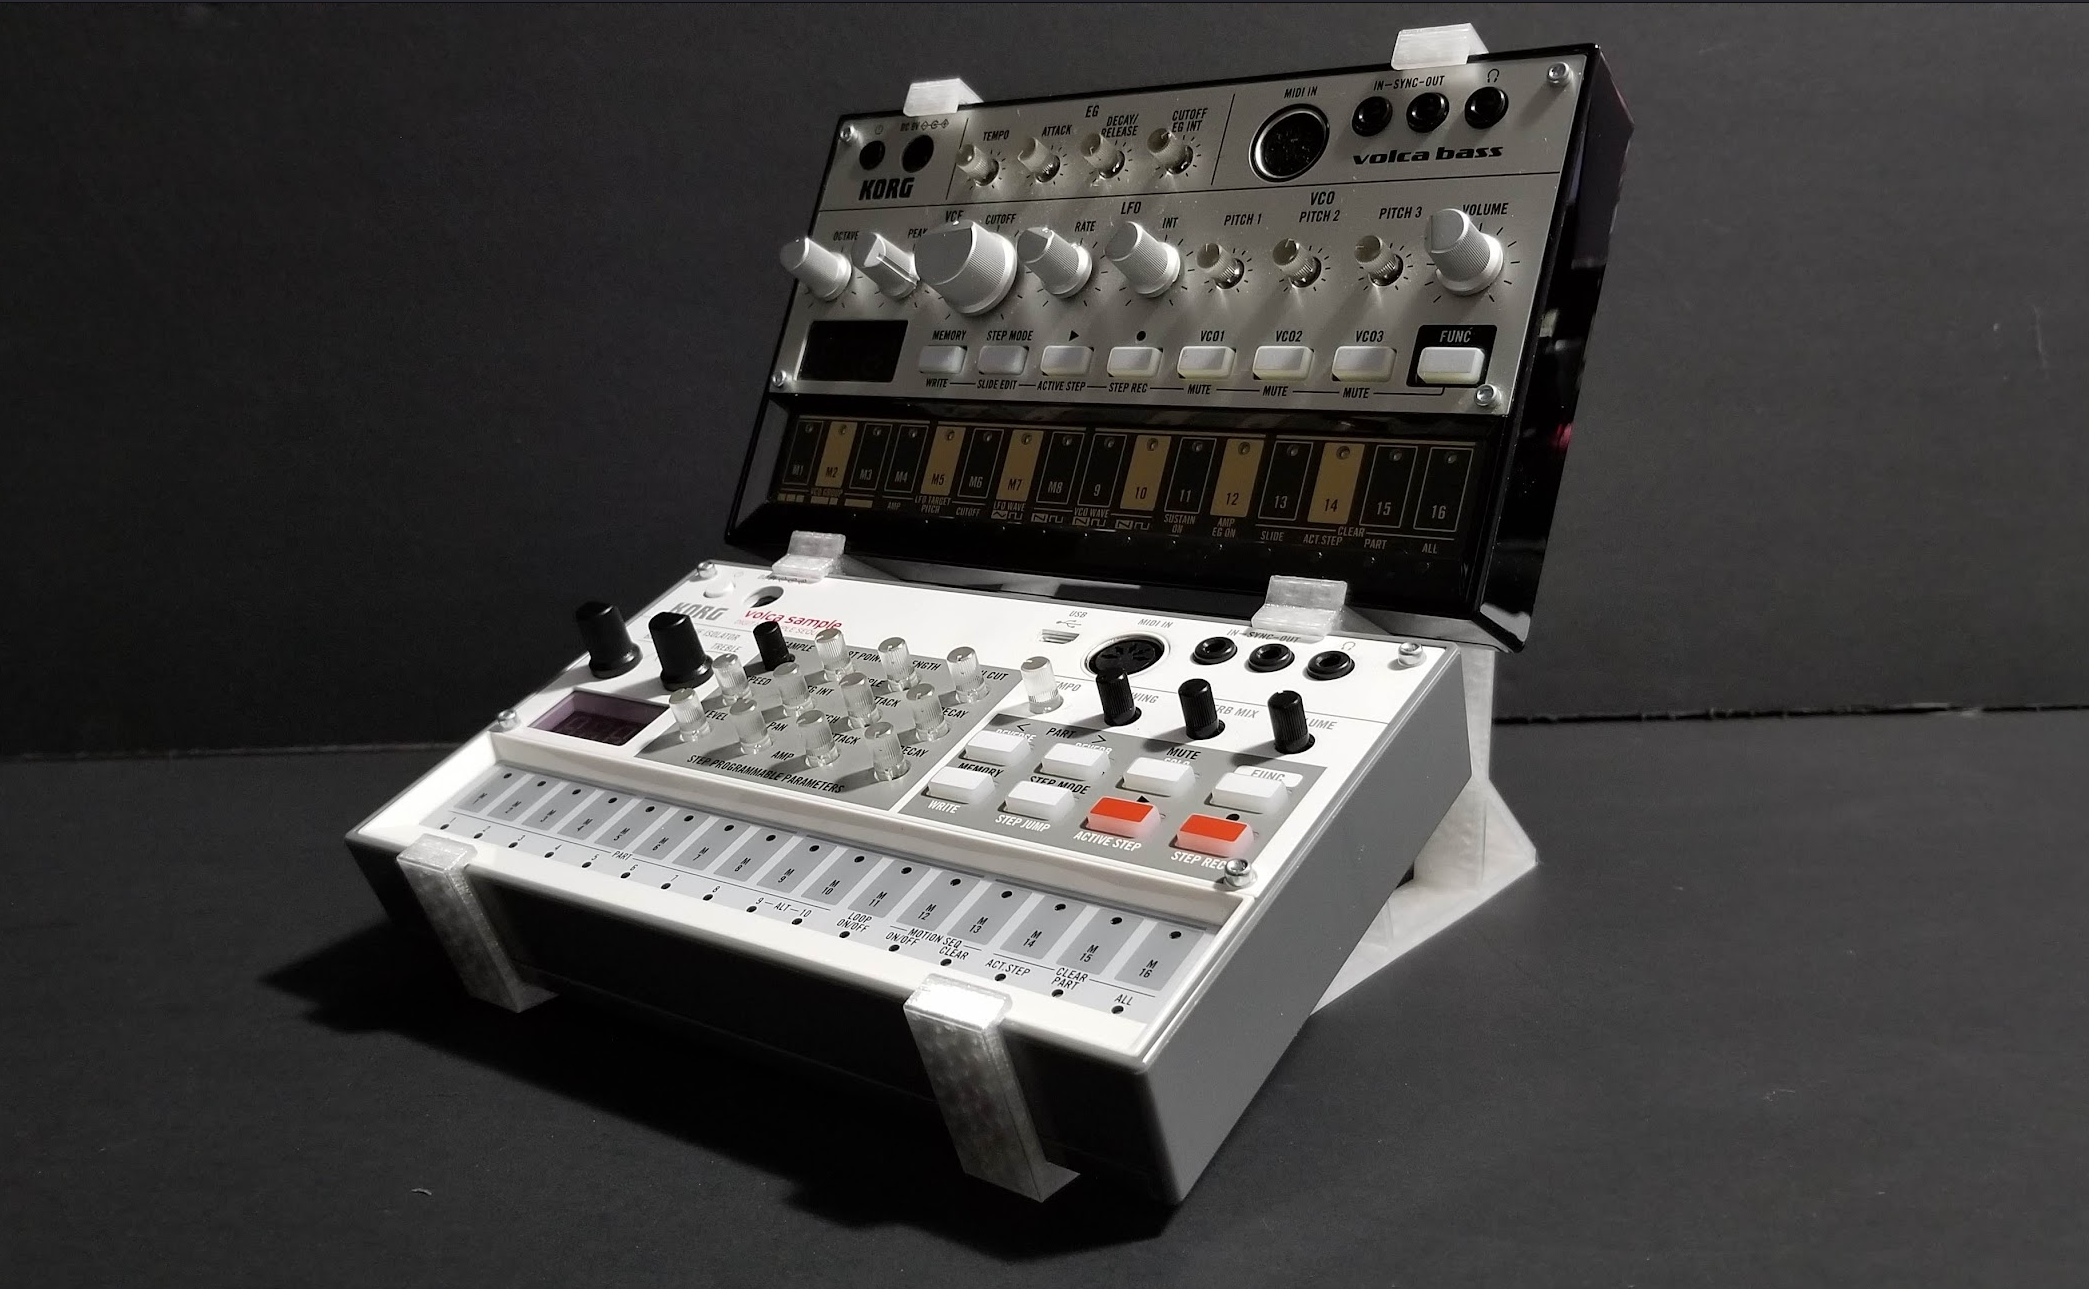 Dual Korg Volca Stand (Remixed to support 2 Korg Volcas)